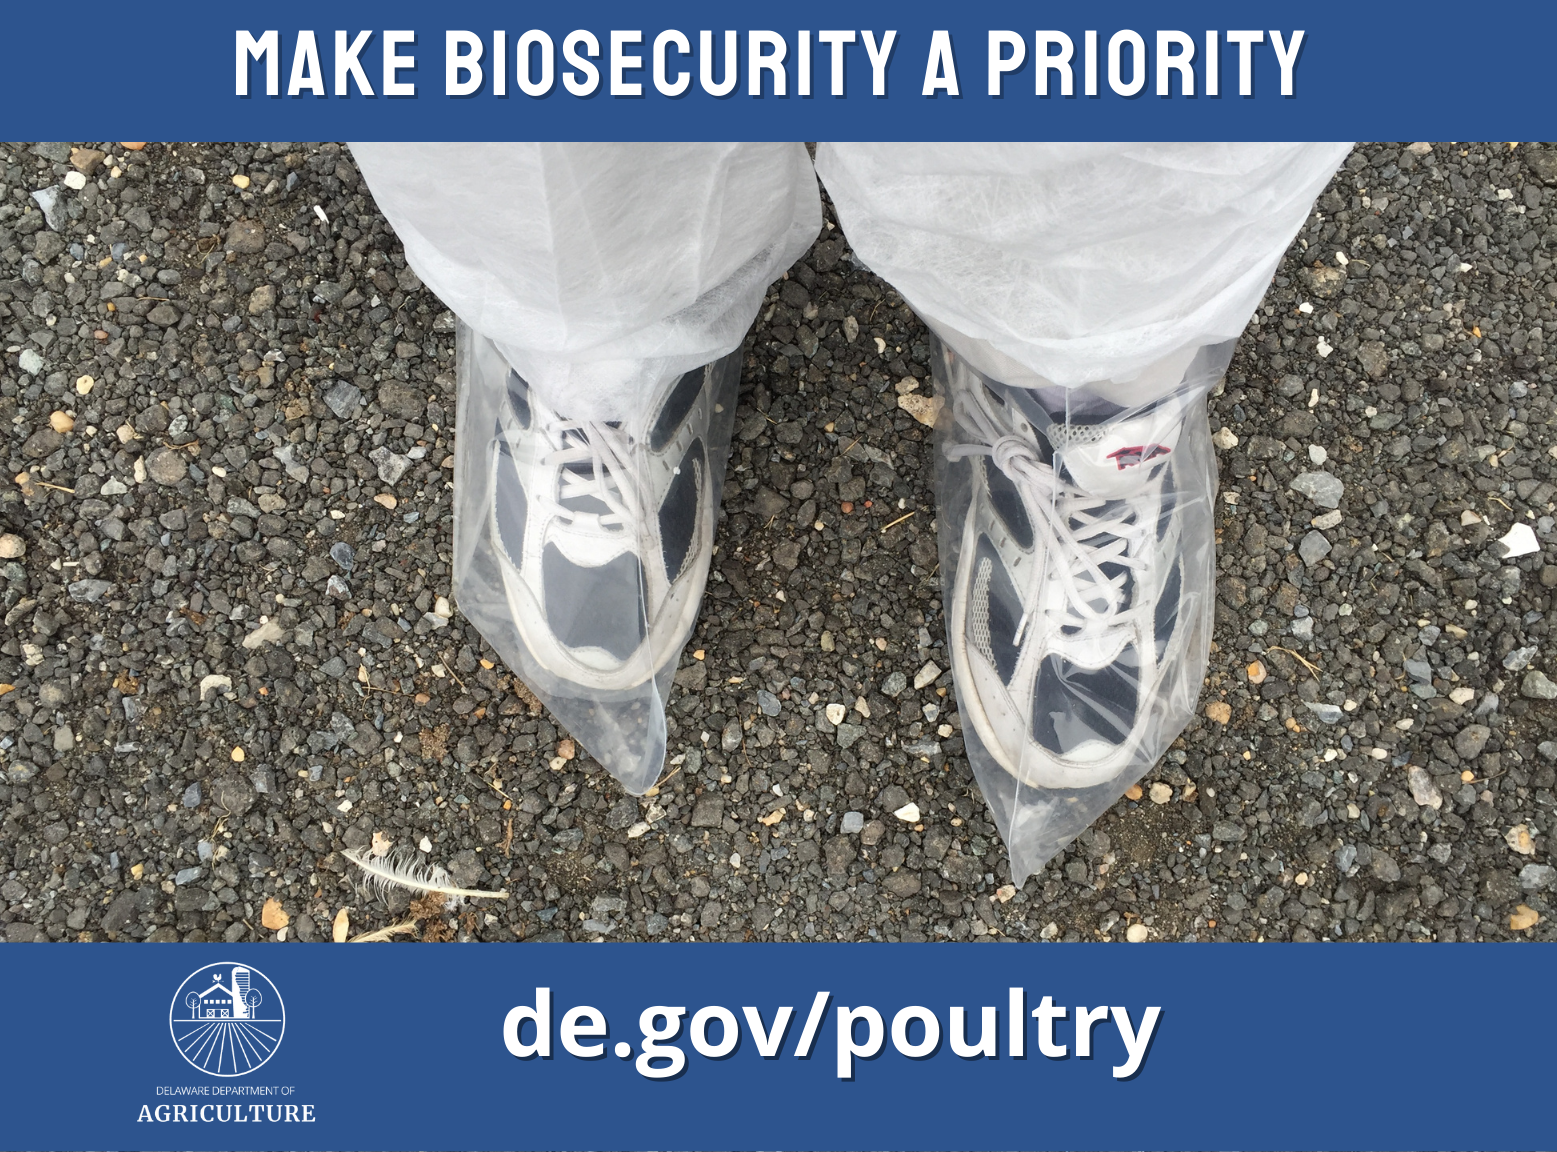 person with plastic disposable booties over sneakers and white Tyvek suit. Words say: Make biosecurity a priority, de.gov/poultry